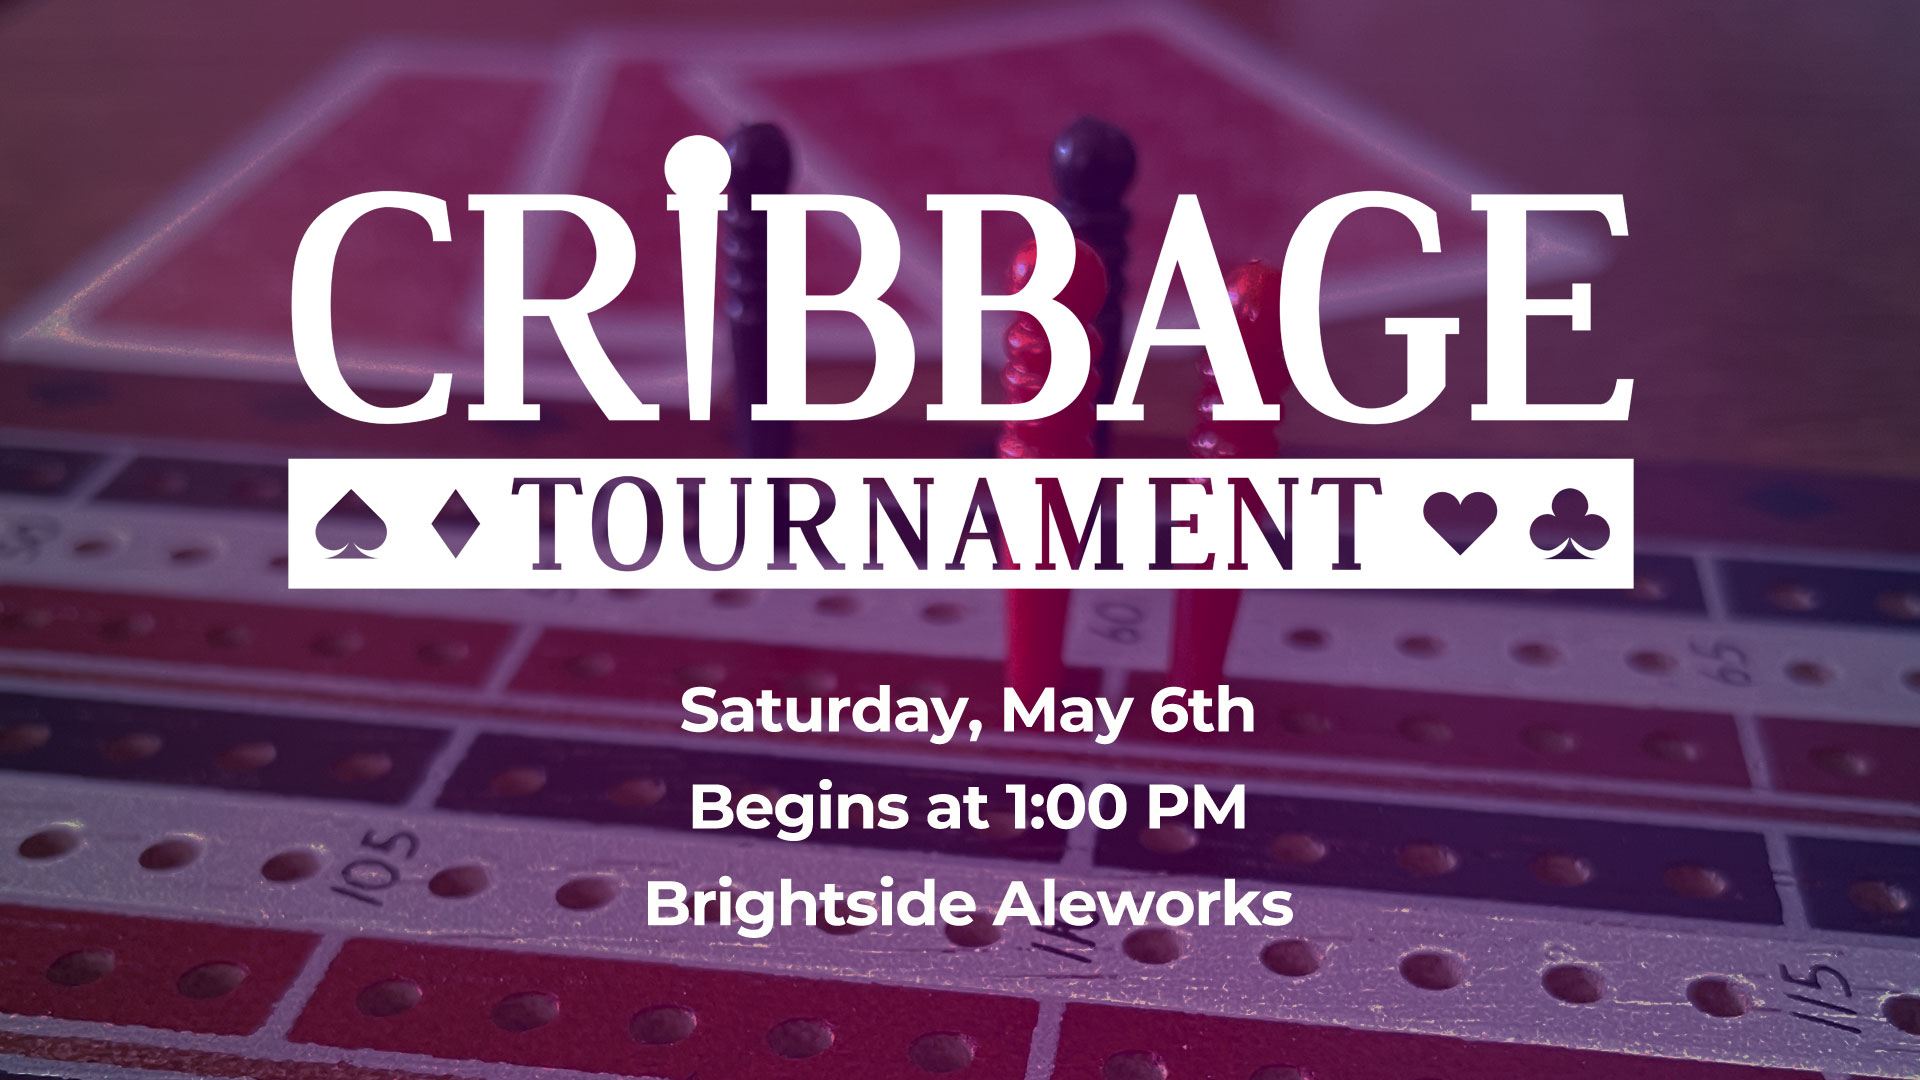 Cribbage Tournament at Brightside Aleworks Event Image May 6 2023